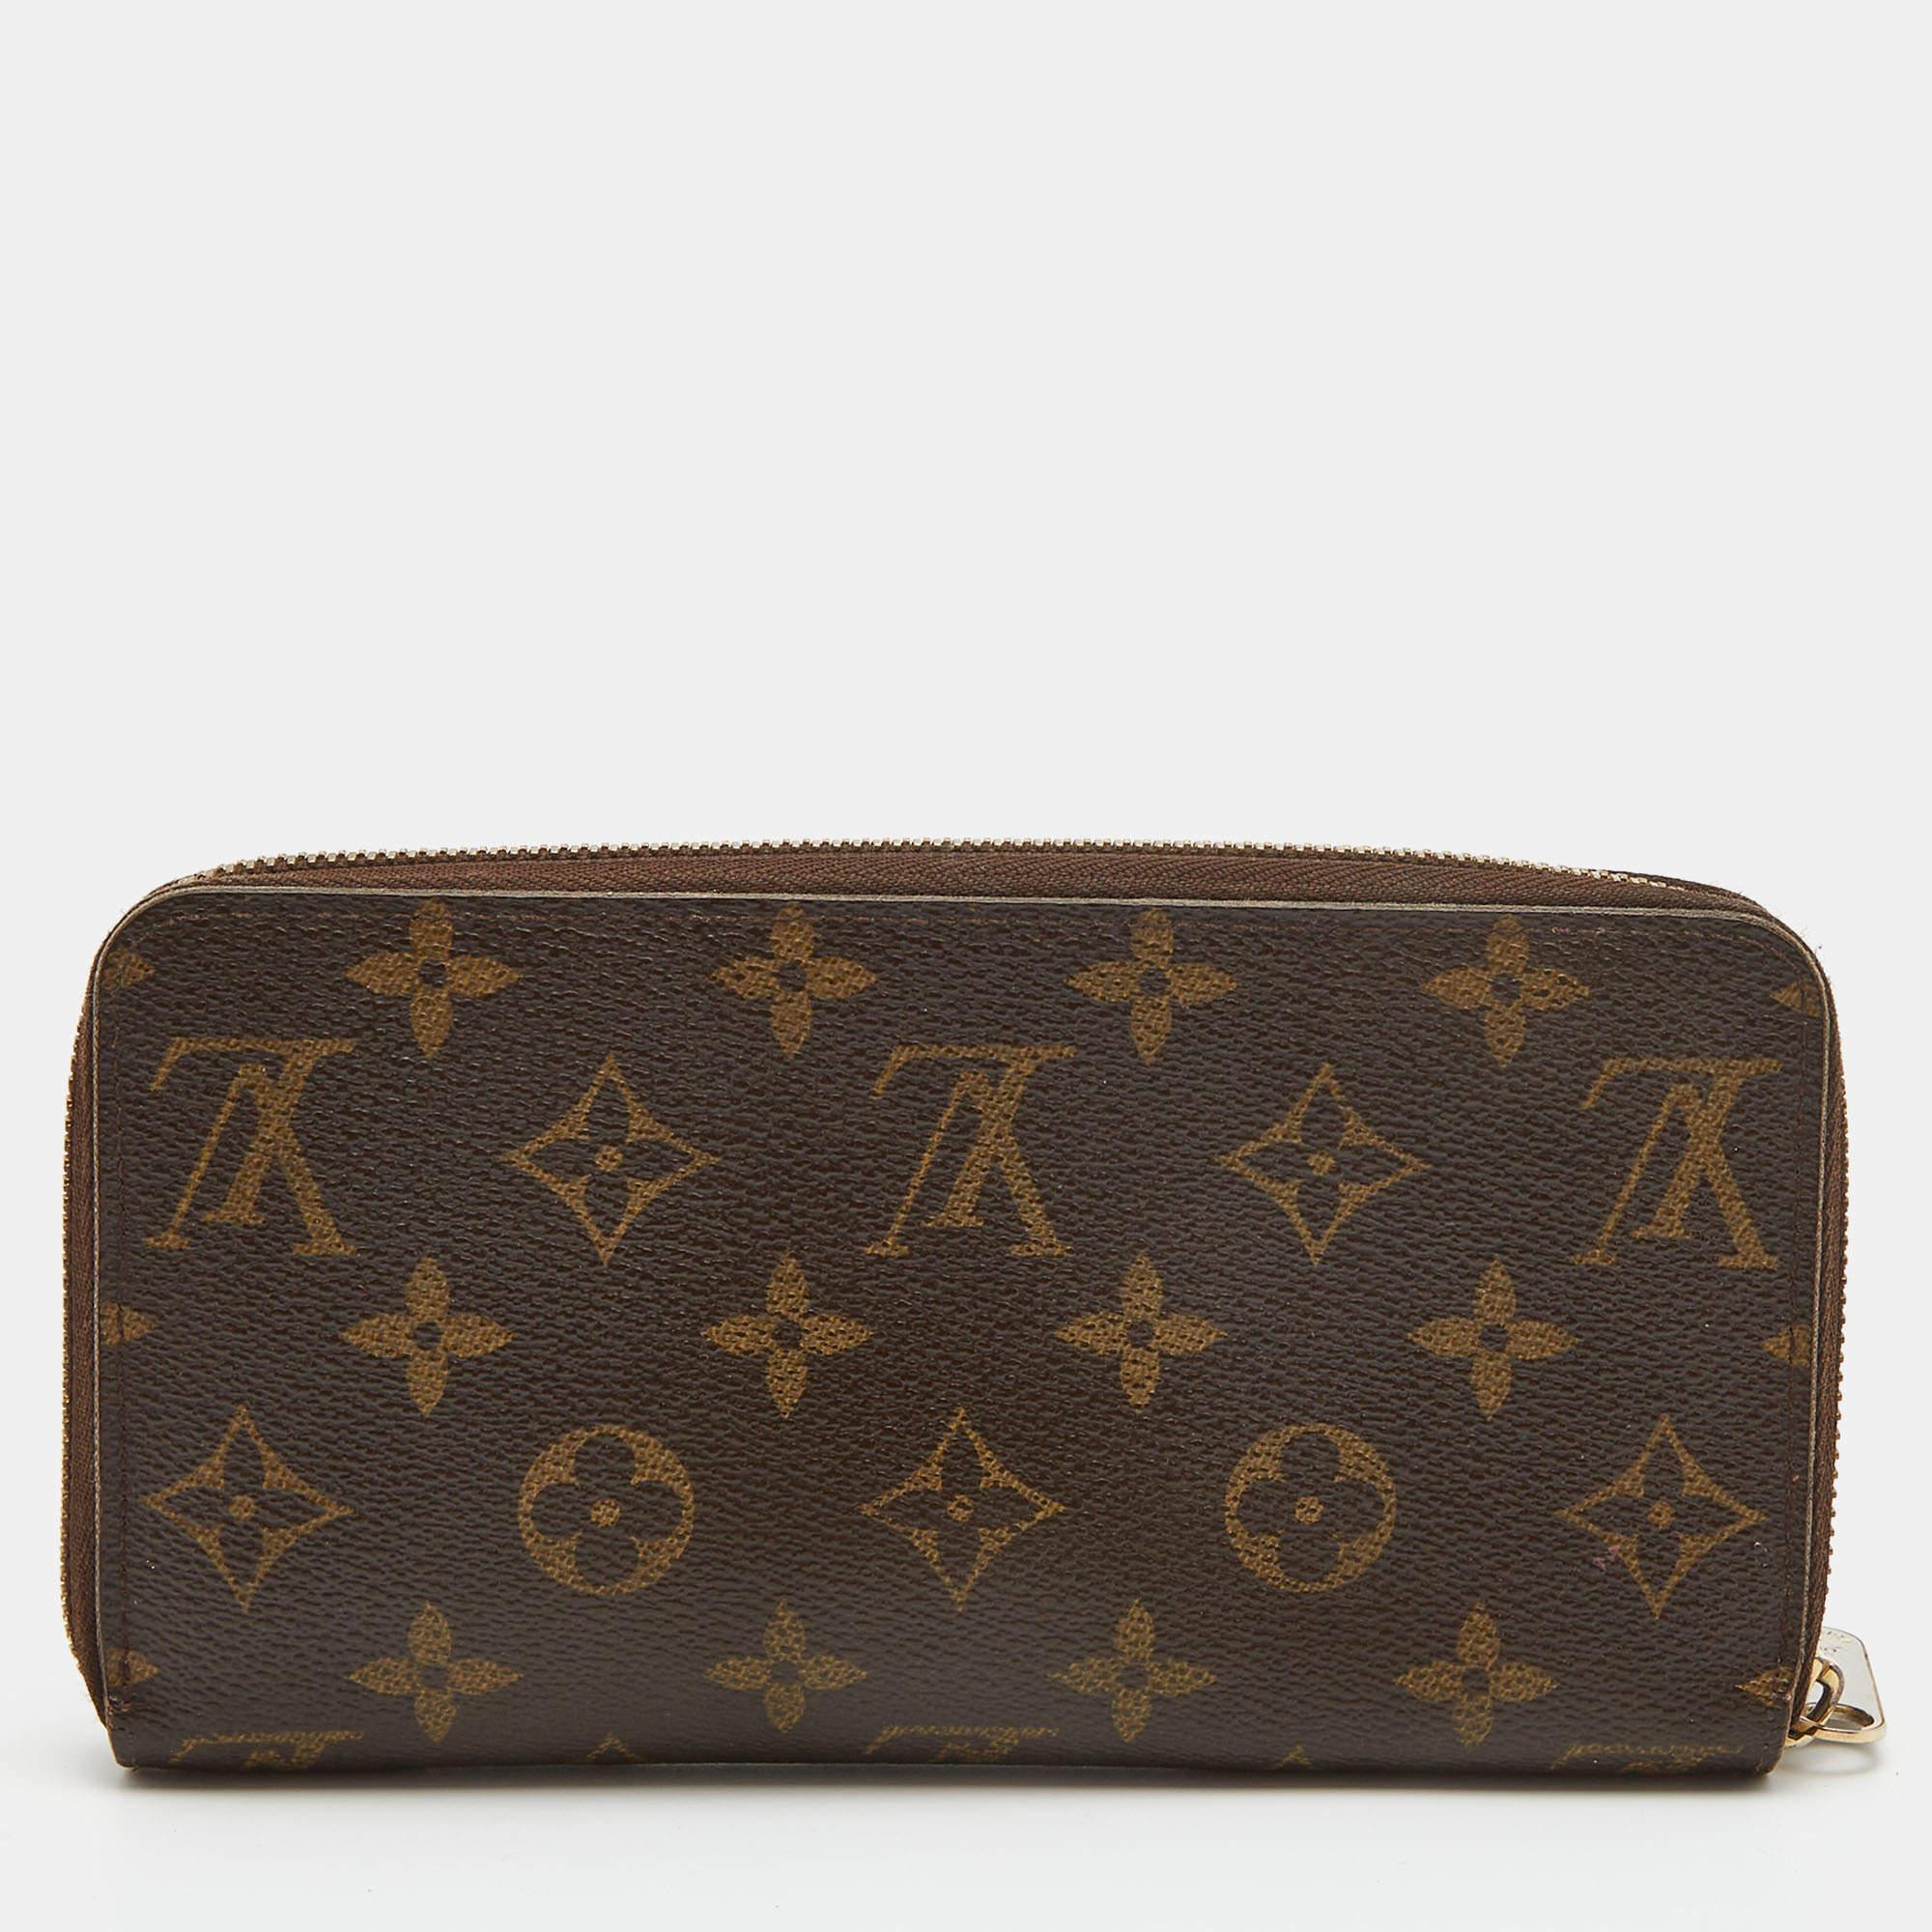 With a rich heritage and meticulous workmanship, each creation of Louis Vuitton is sure to impress you with its notable features. This Zippy wallet is conveniently designed for everyday use. Crafted from Monogram Canvas, it is paired with a